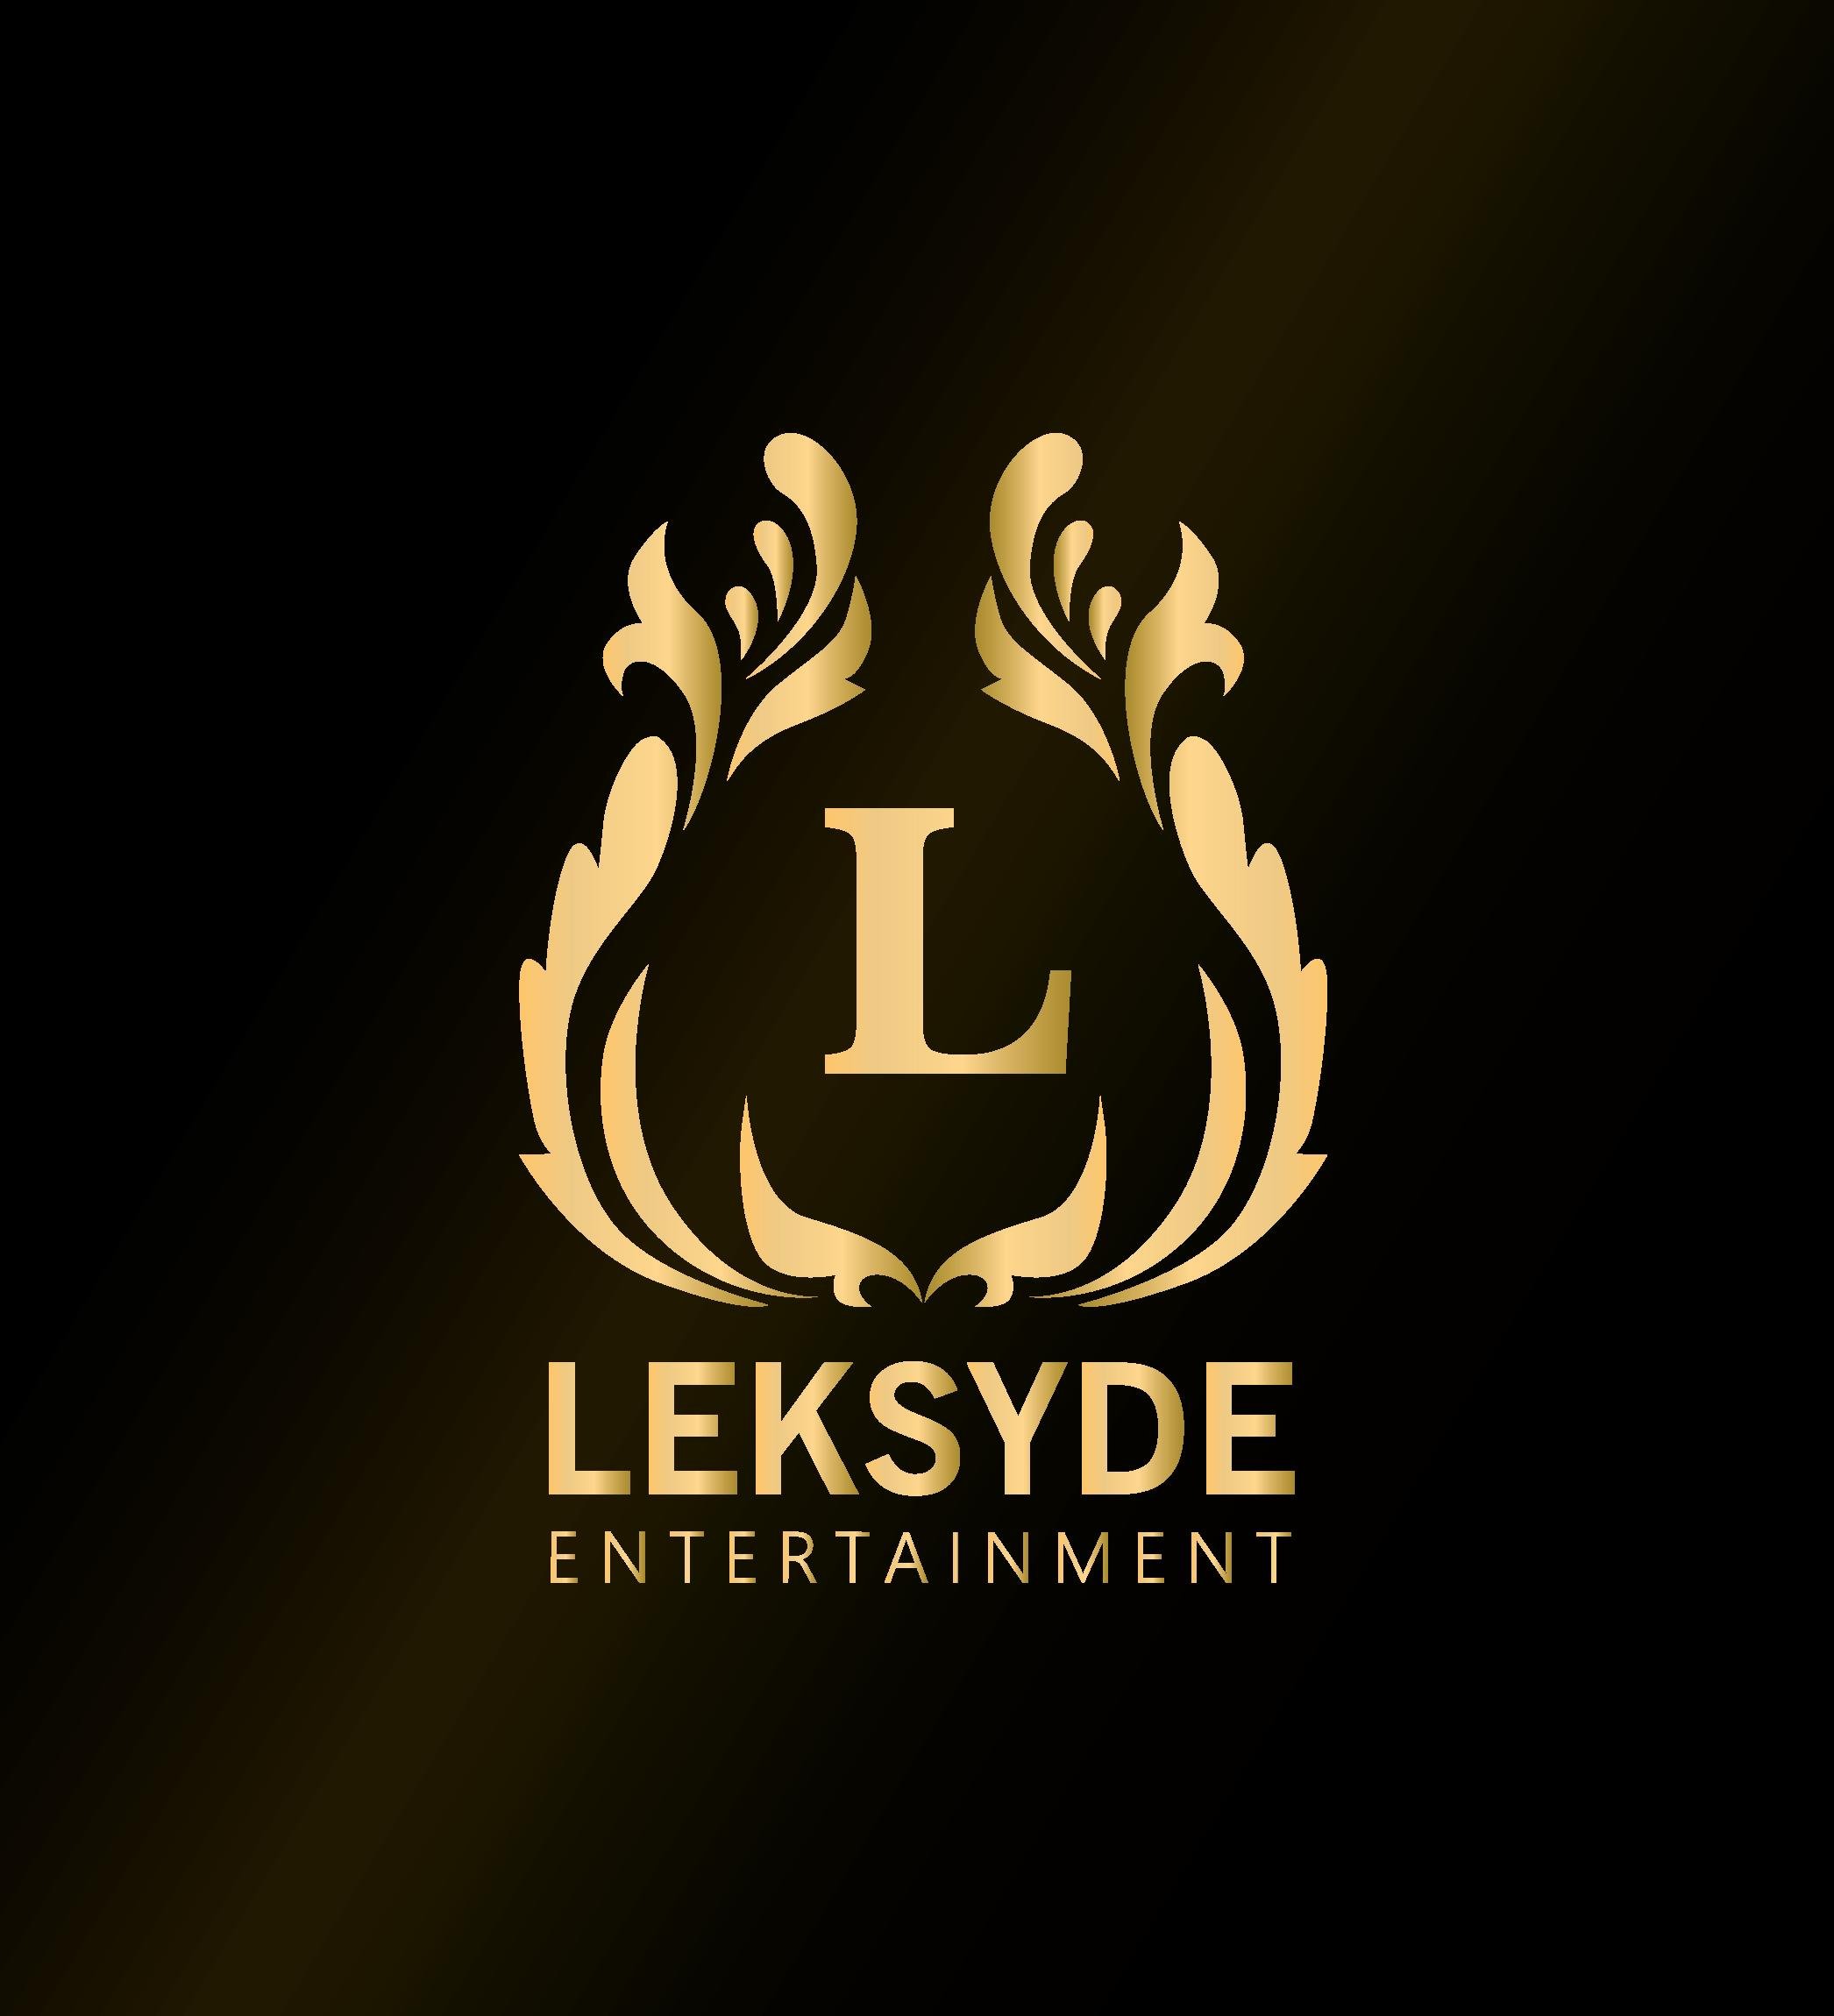 Leksyde Entertainment is a black owned agency – Record Label, Service Artist Management, Event Production, Artist tour, venue management and consulting company.